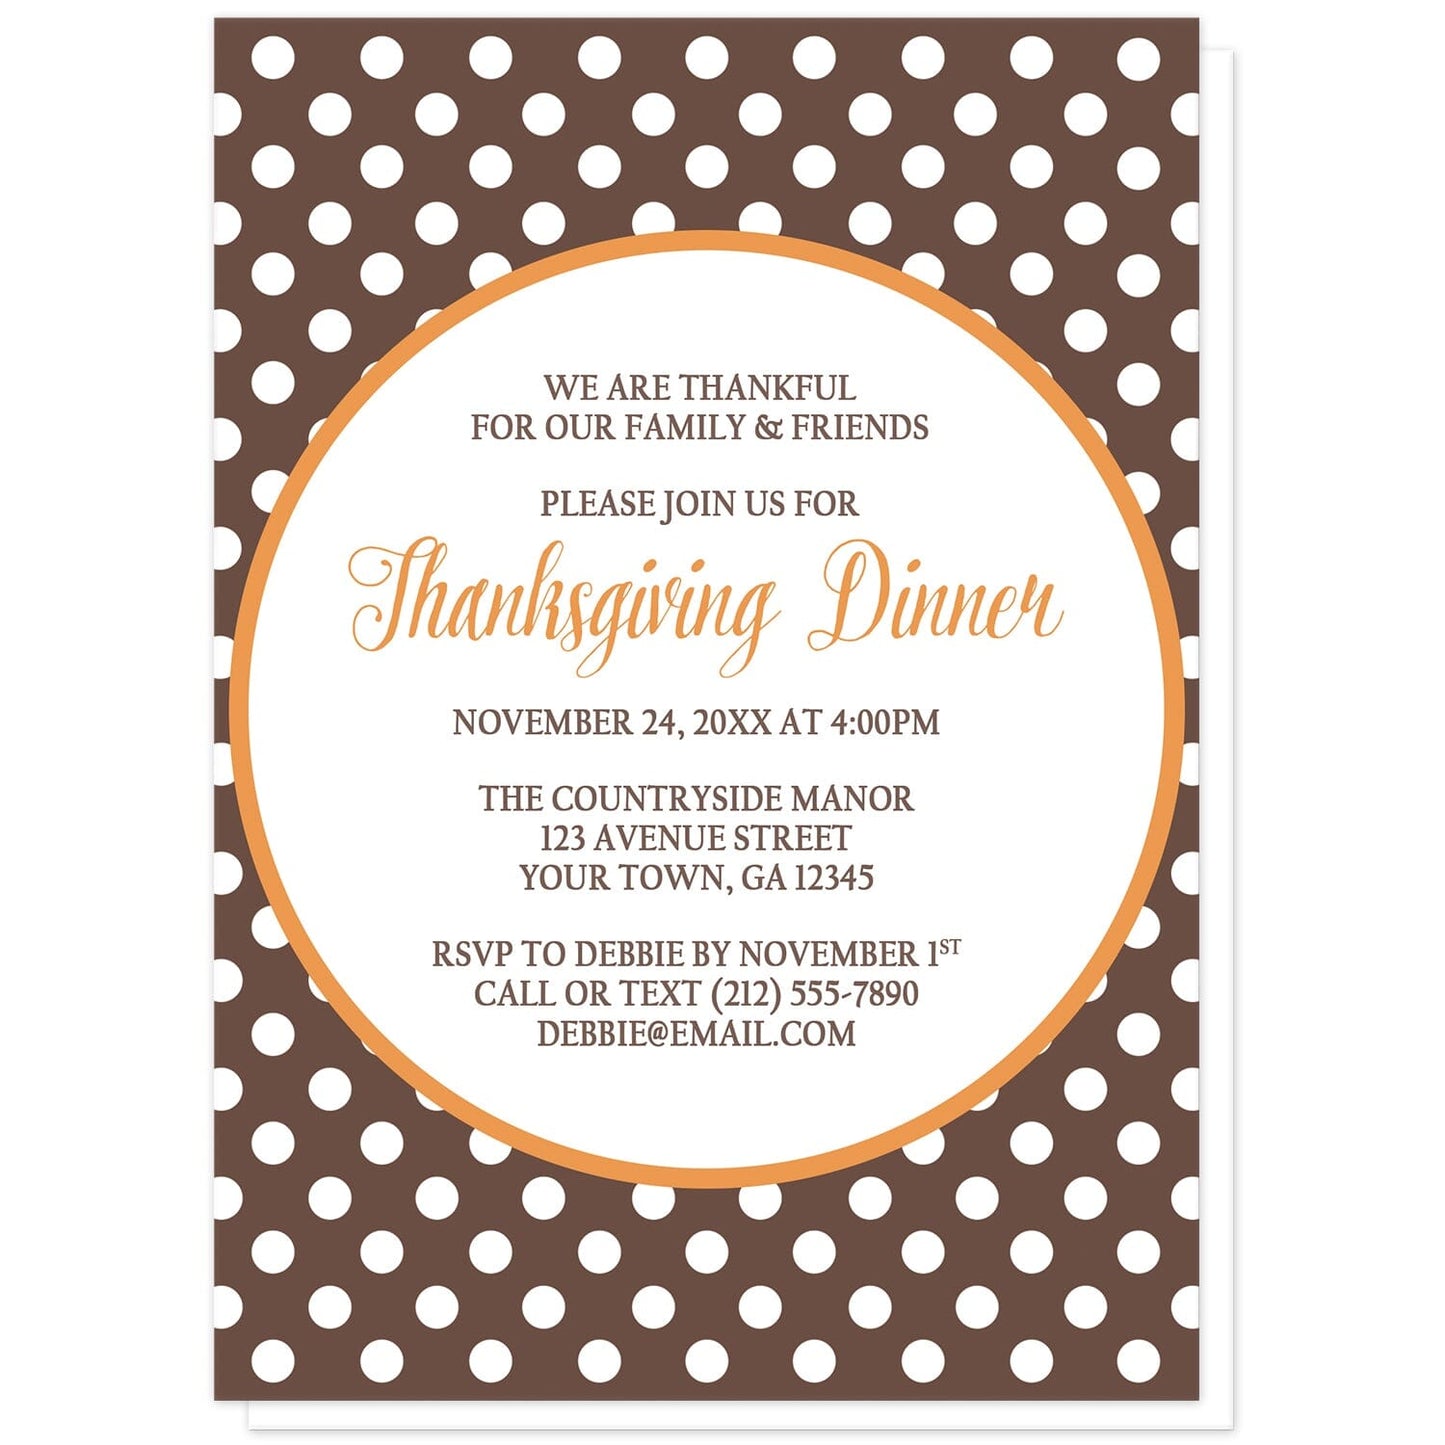 Orange Brown Polka Dot Thanksgiving Invitations at Artistically Invited. Autumn-inspired orange brown polka dot Thanksgiving invitations with your holiday celebration details custom printed in orange and brown inside a white circle outlined in orange, over a brown polka dot pattern. "Thanksgiving Dinner" is printed in orange while the remaining details are printed in brown.